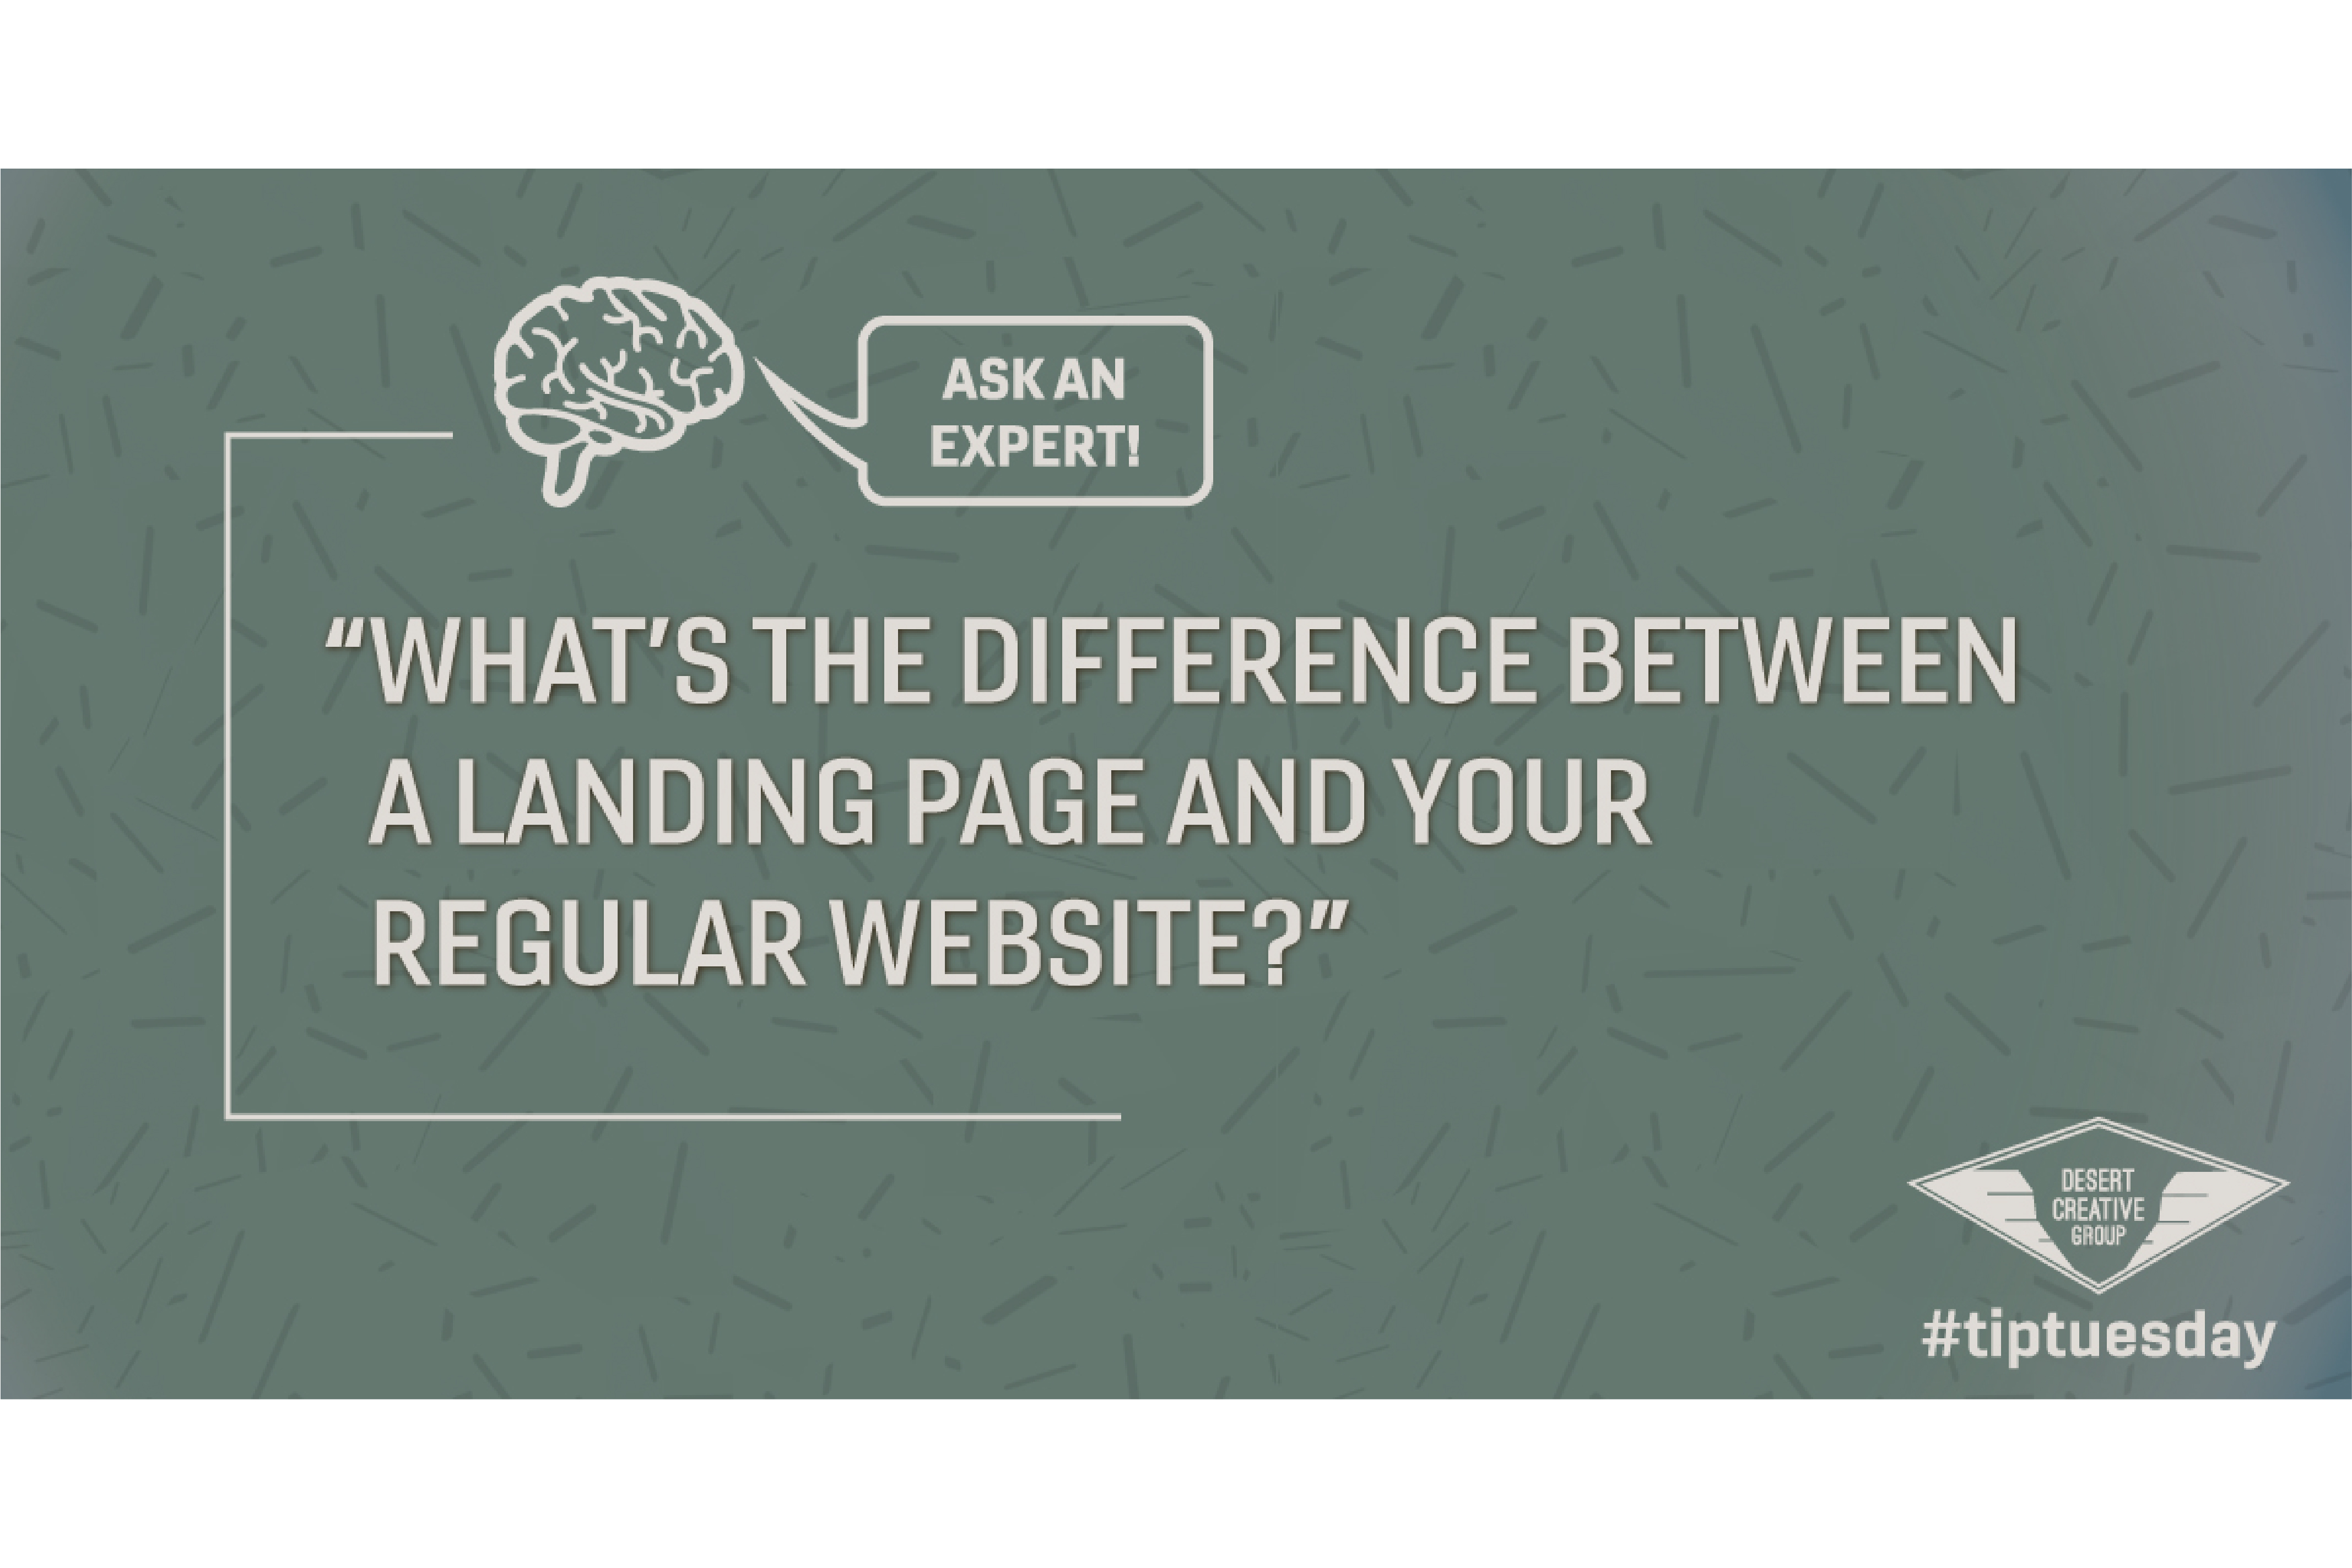 What's the difference between a landing page and your regular website?